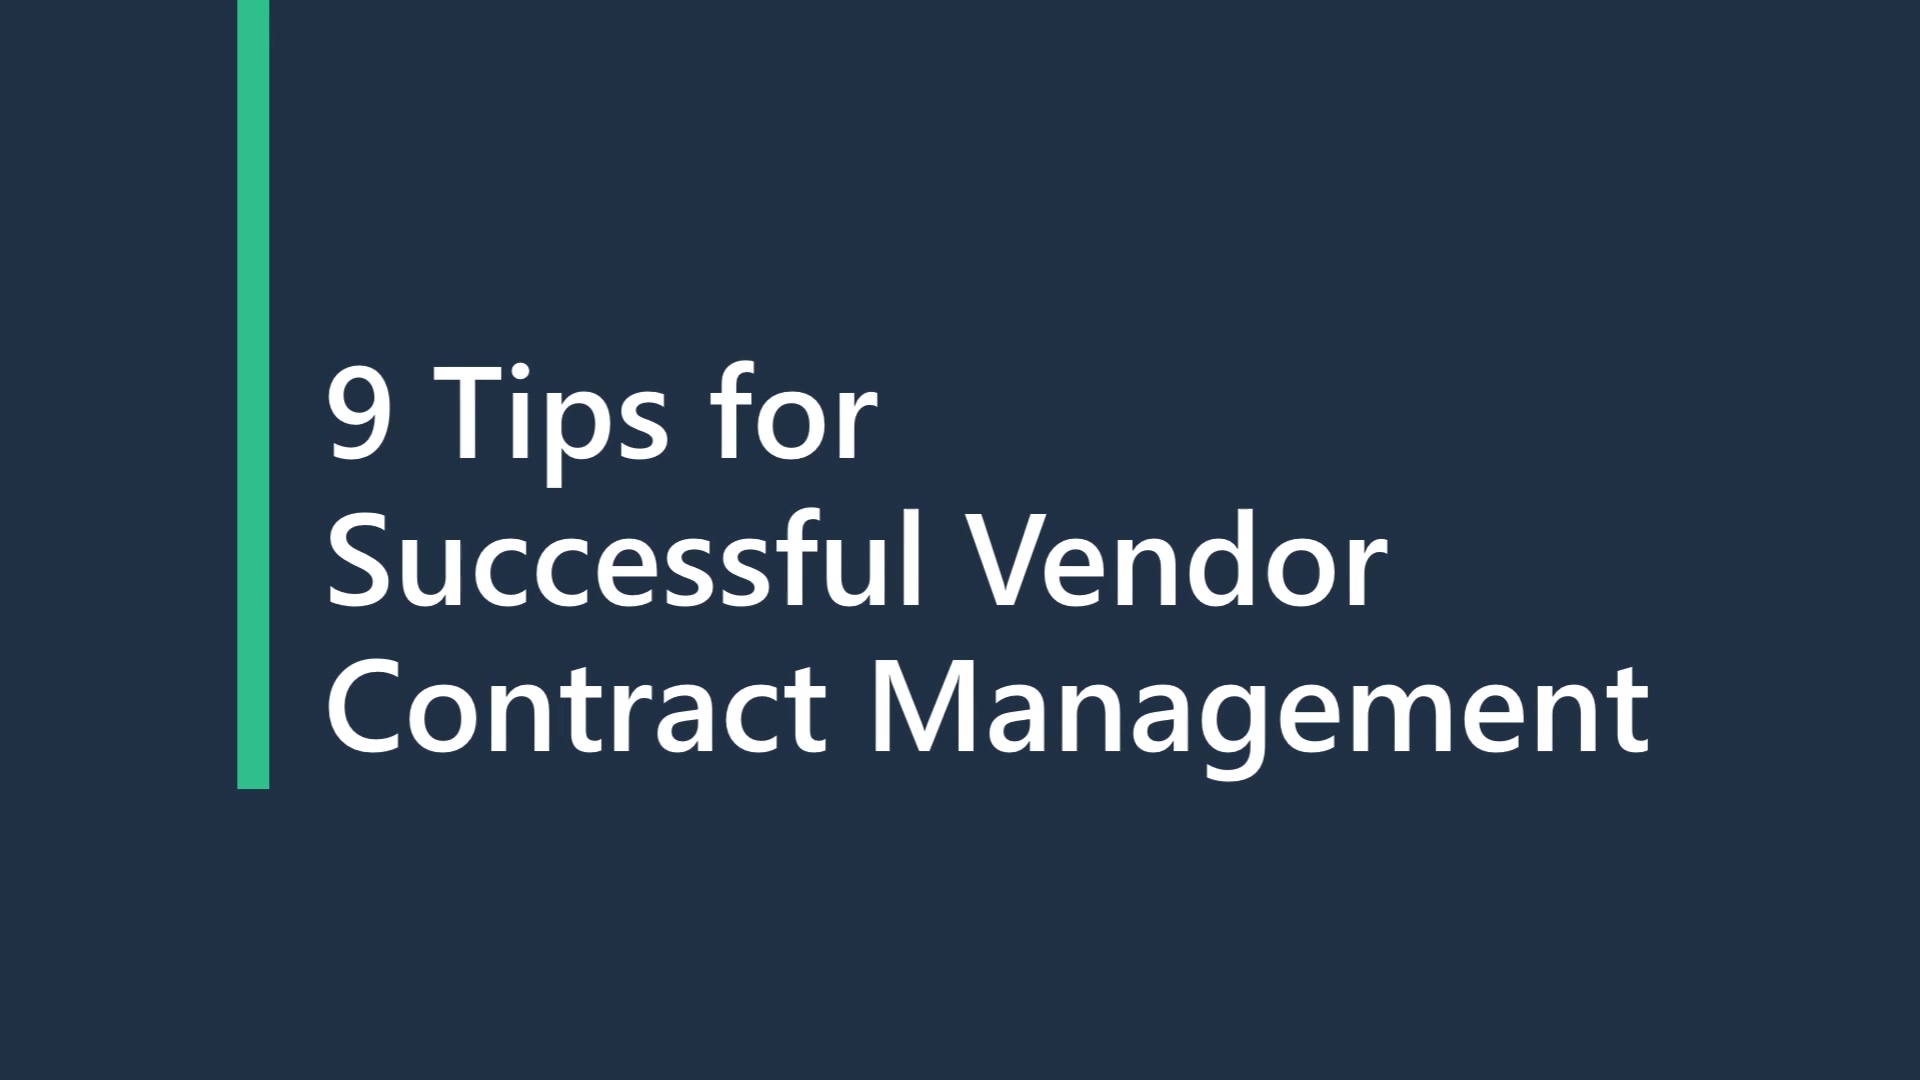 Video 6 - Tips for Successful Vendor Contract Management V1